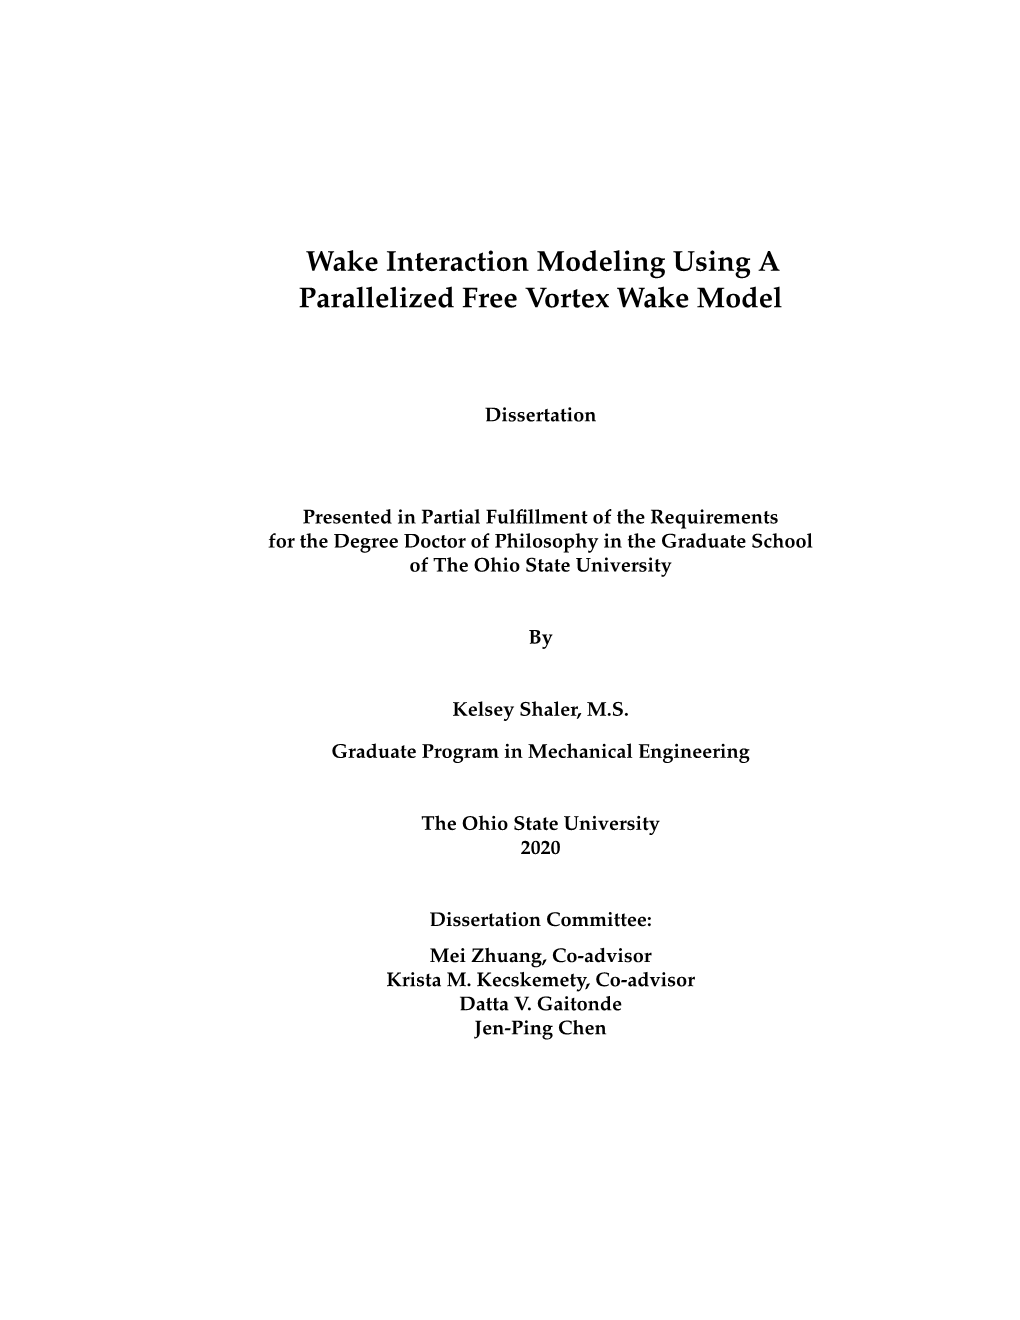 Wake Interaction Modeling Using a Parallelized Free Vortex Wake Model